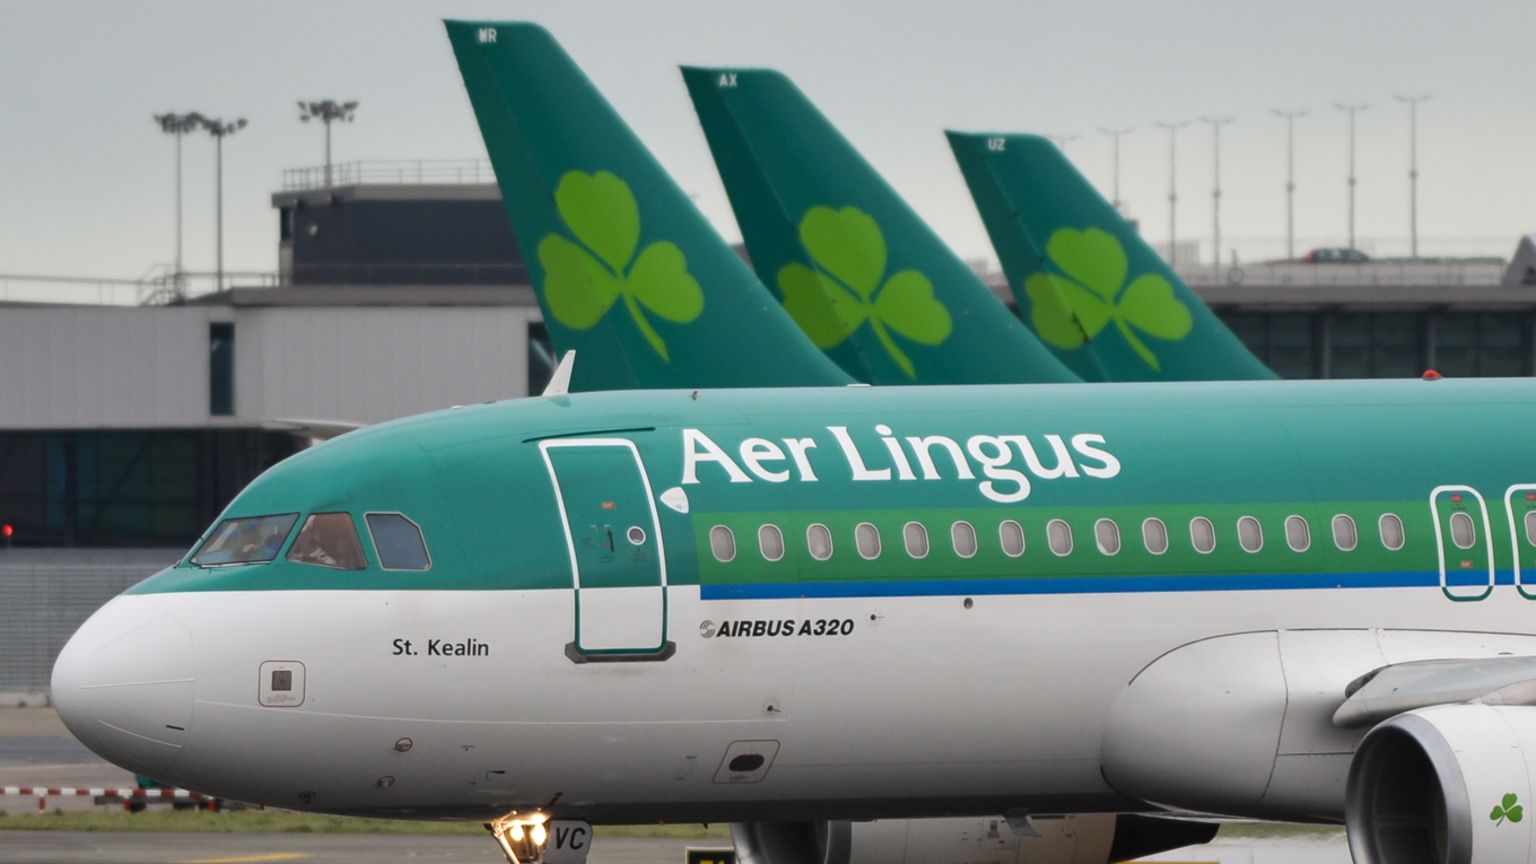 Green and white Plane with Aer Lingus written across it with three plane tail wings in the background that each have the Aer Lingus shamrock logo on them